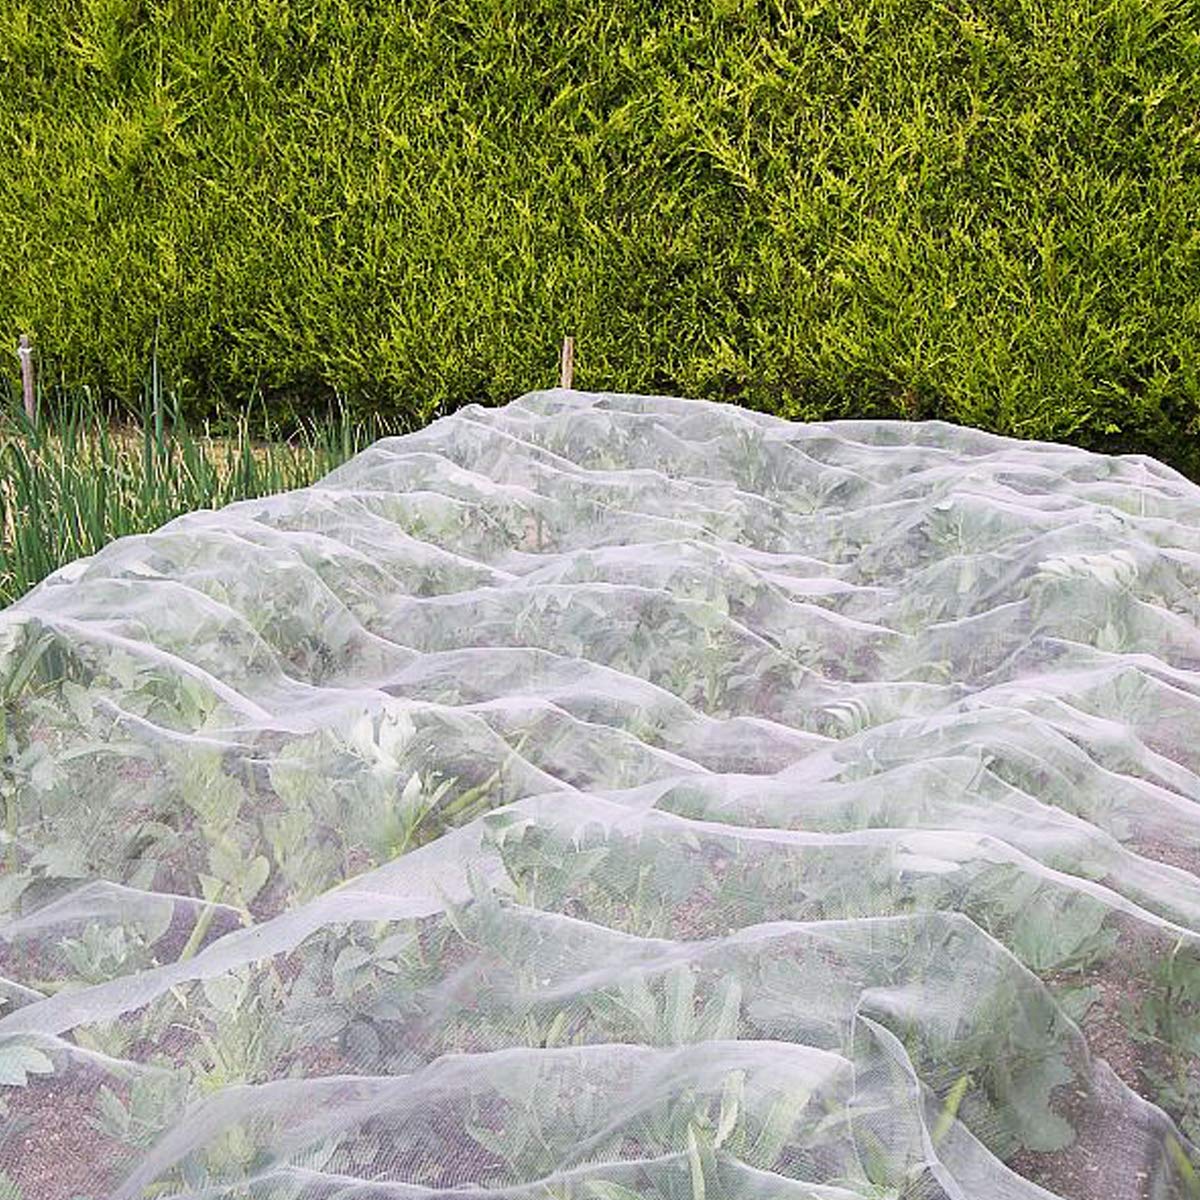 Ultra Fine Garden Mesh Netting, Plant Covers 8'x24' Garden Netting for Protect Vegetable Plants Fruits Flowers Crops Greenhouse Row Cover Protection Mesh Net Covers Patio Gazebo Screen Barrier Net